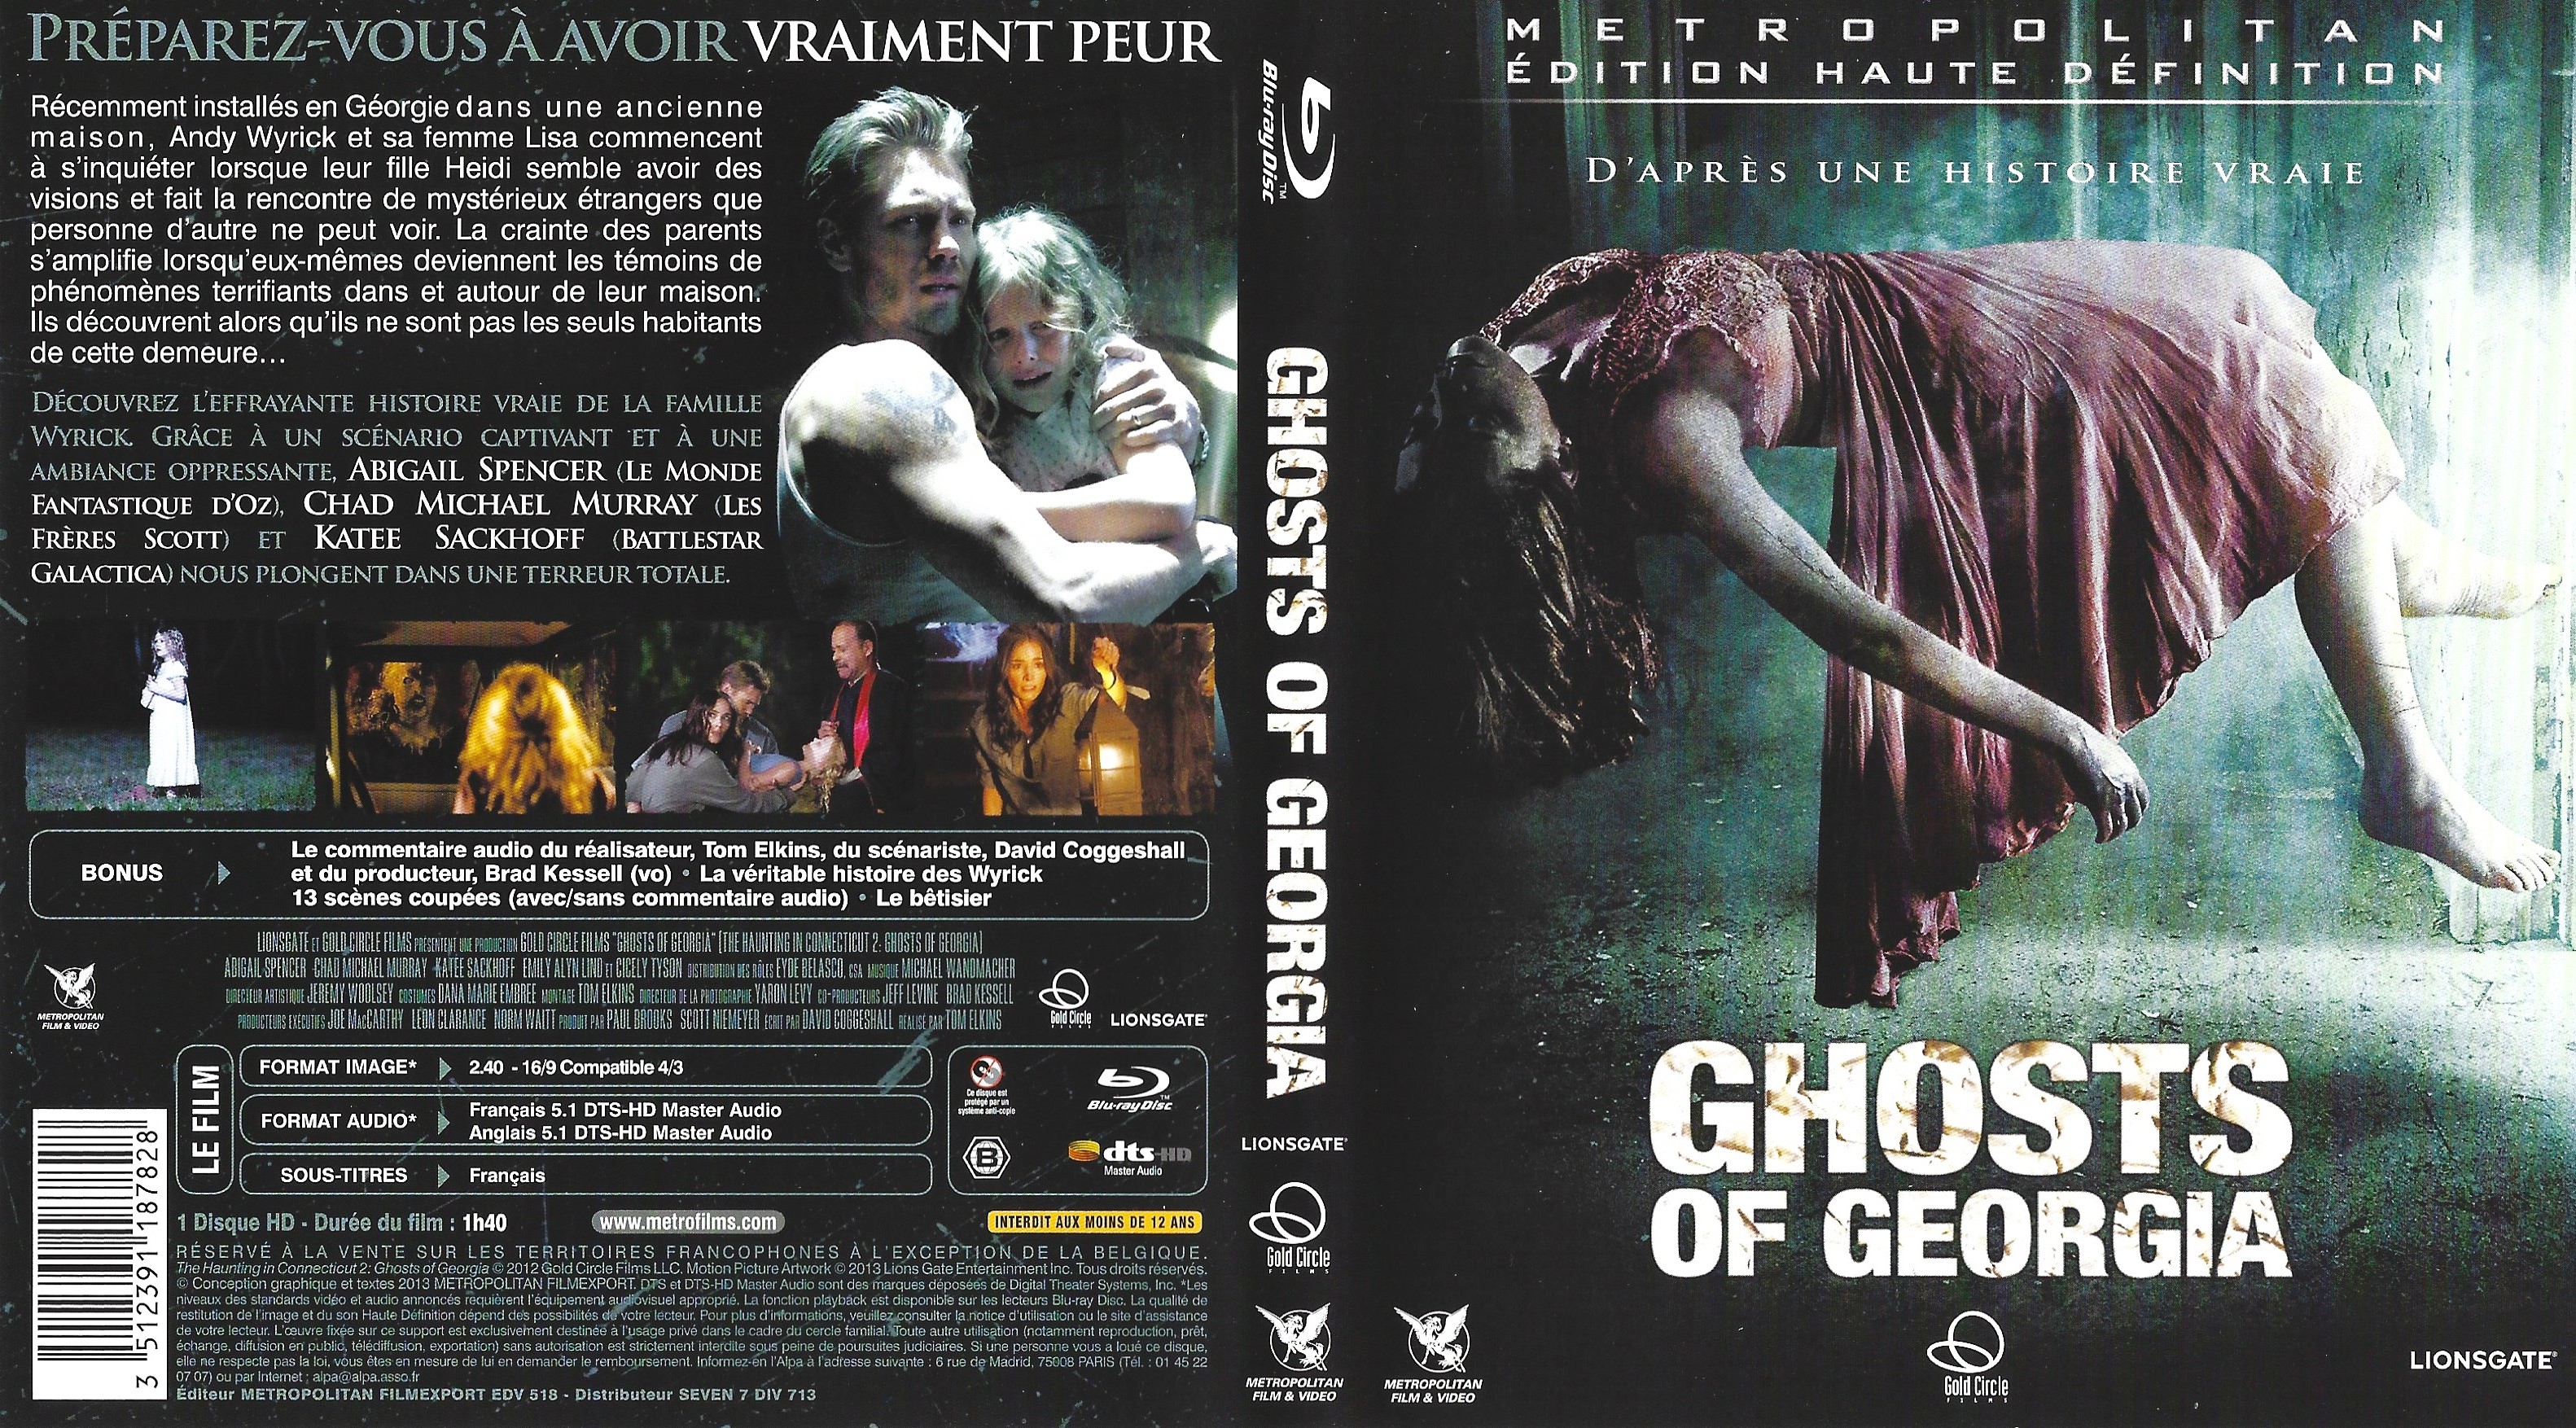 Jaquette DVD Ghosts of Georgia (BLU-RAY)